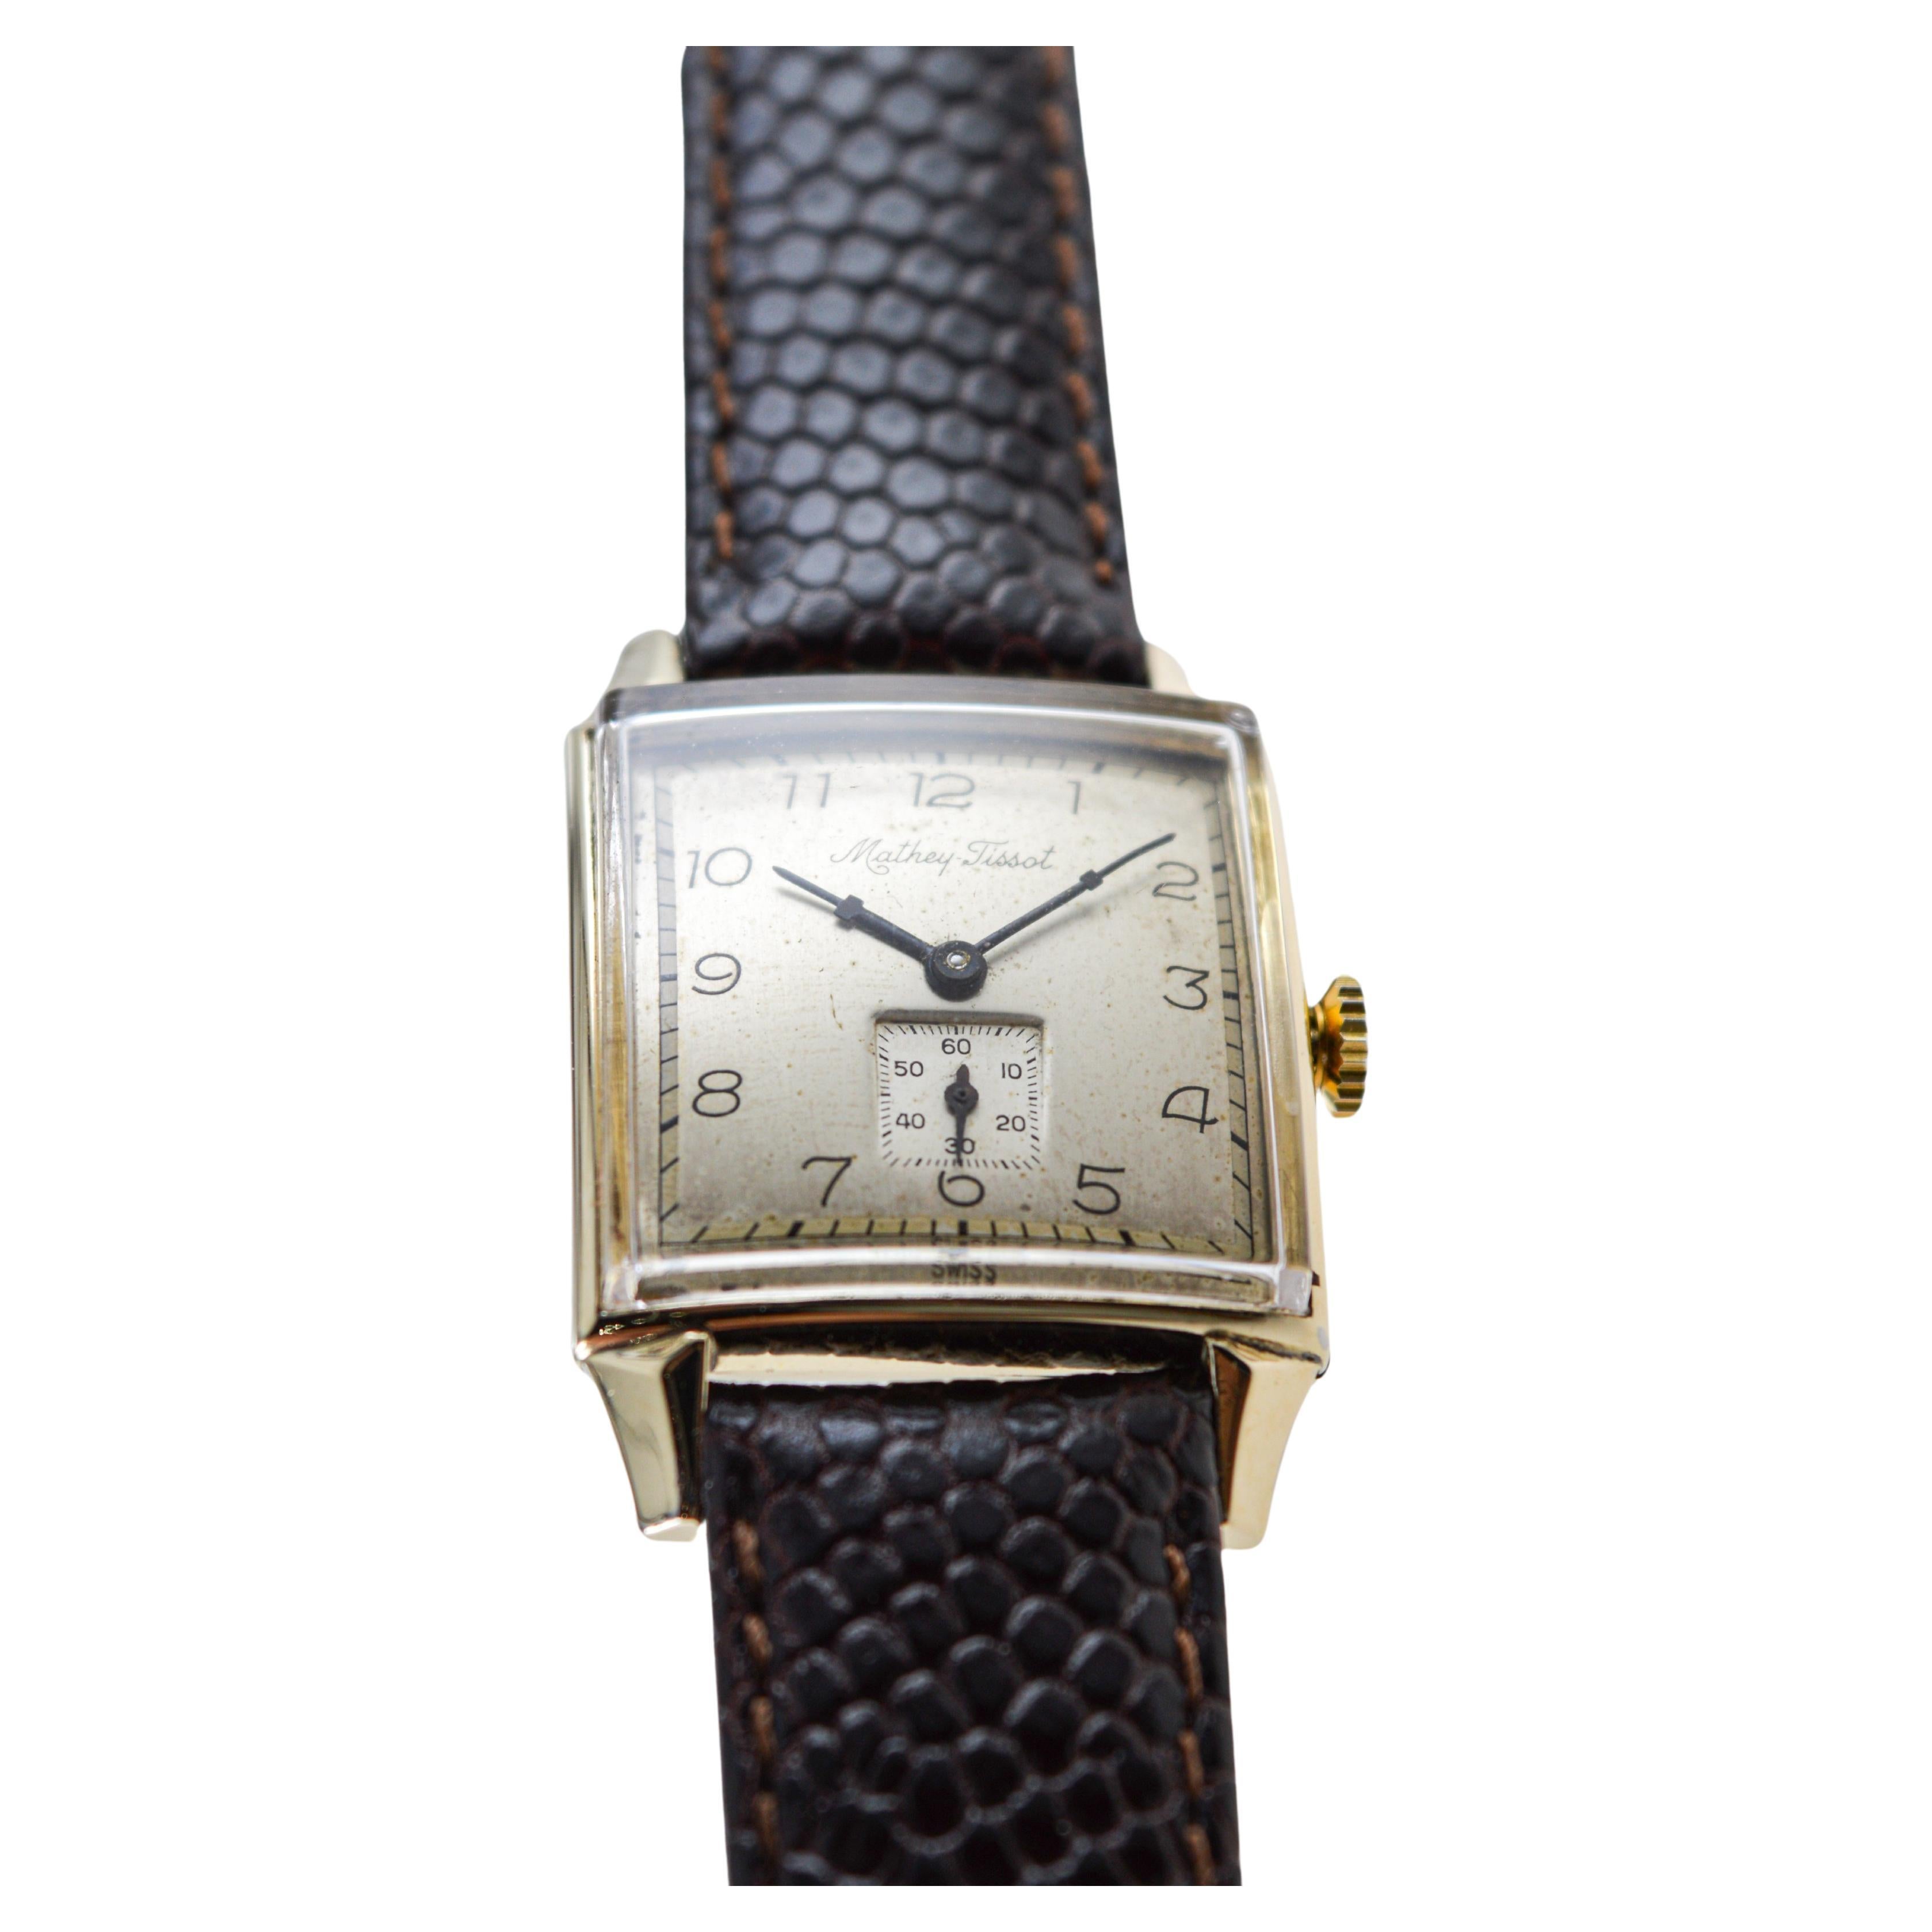 Art Deco Mathey Tissot Gold Filled Watch in New Condition, Circa 1940's For Sale